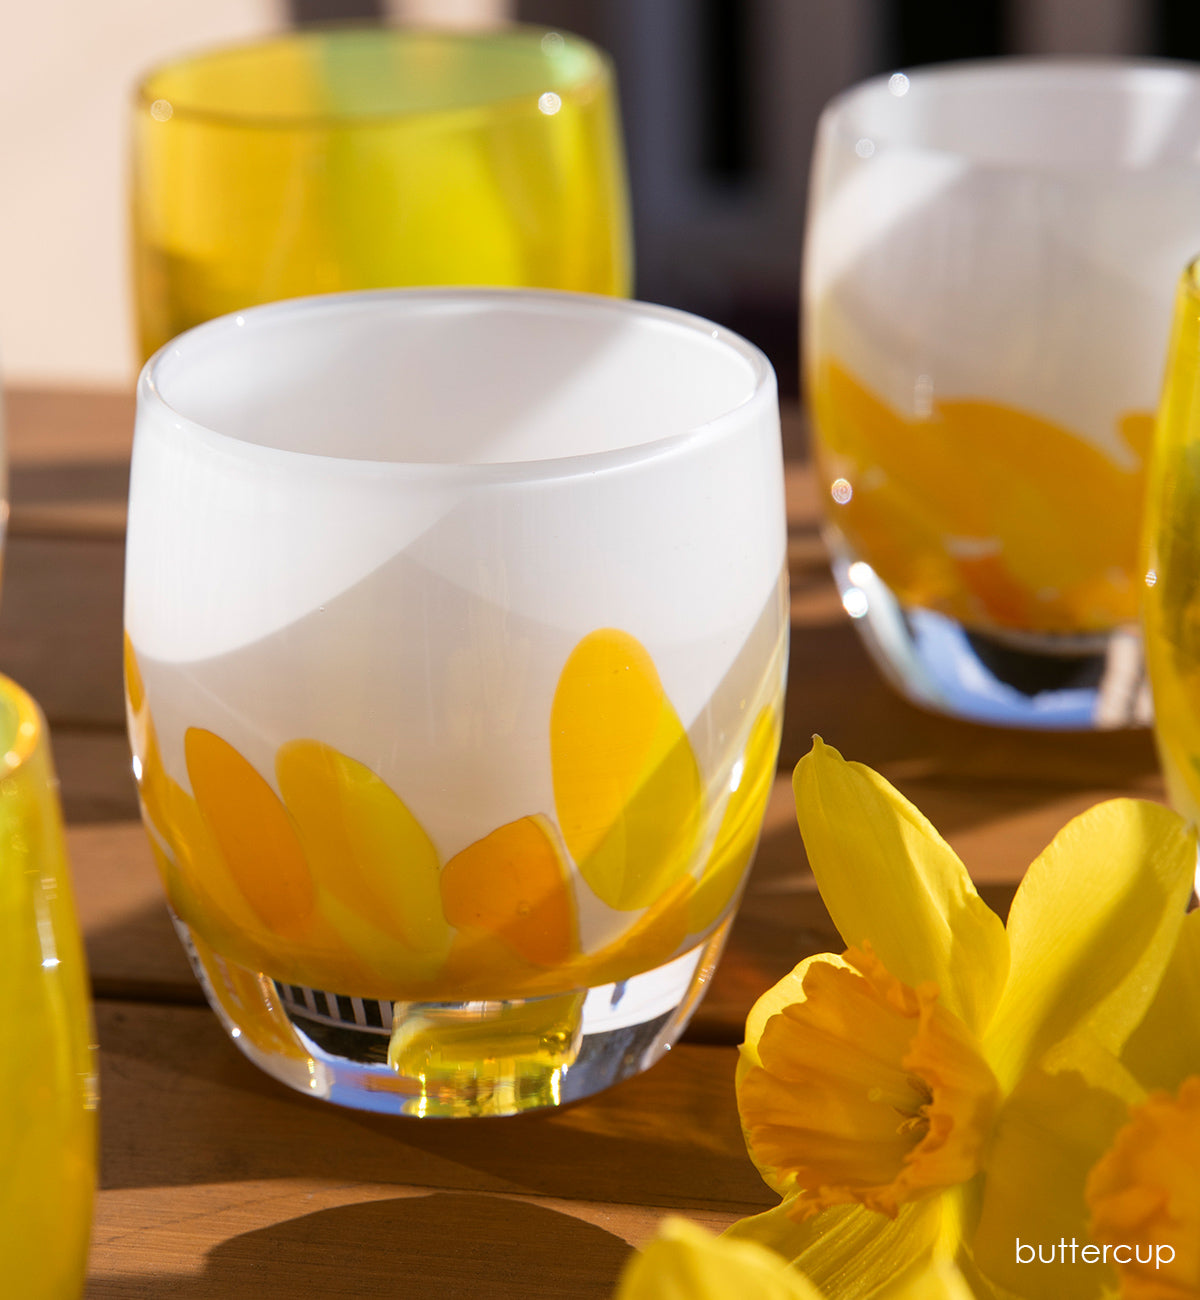 buttercup, yellow petals on white, hand-blown glass votive candle holders on a wood table with fresh daffodil flowers.